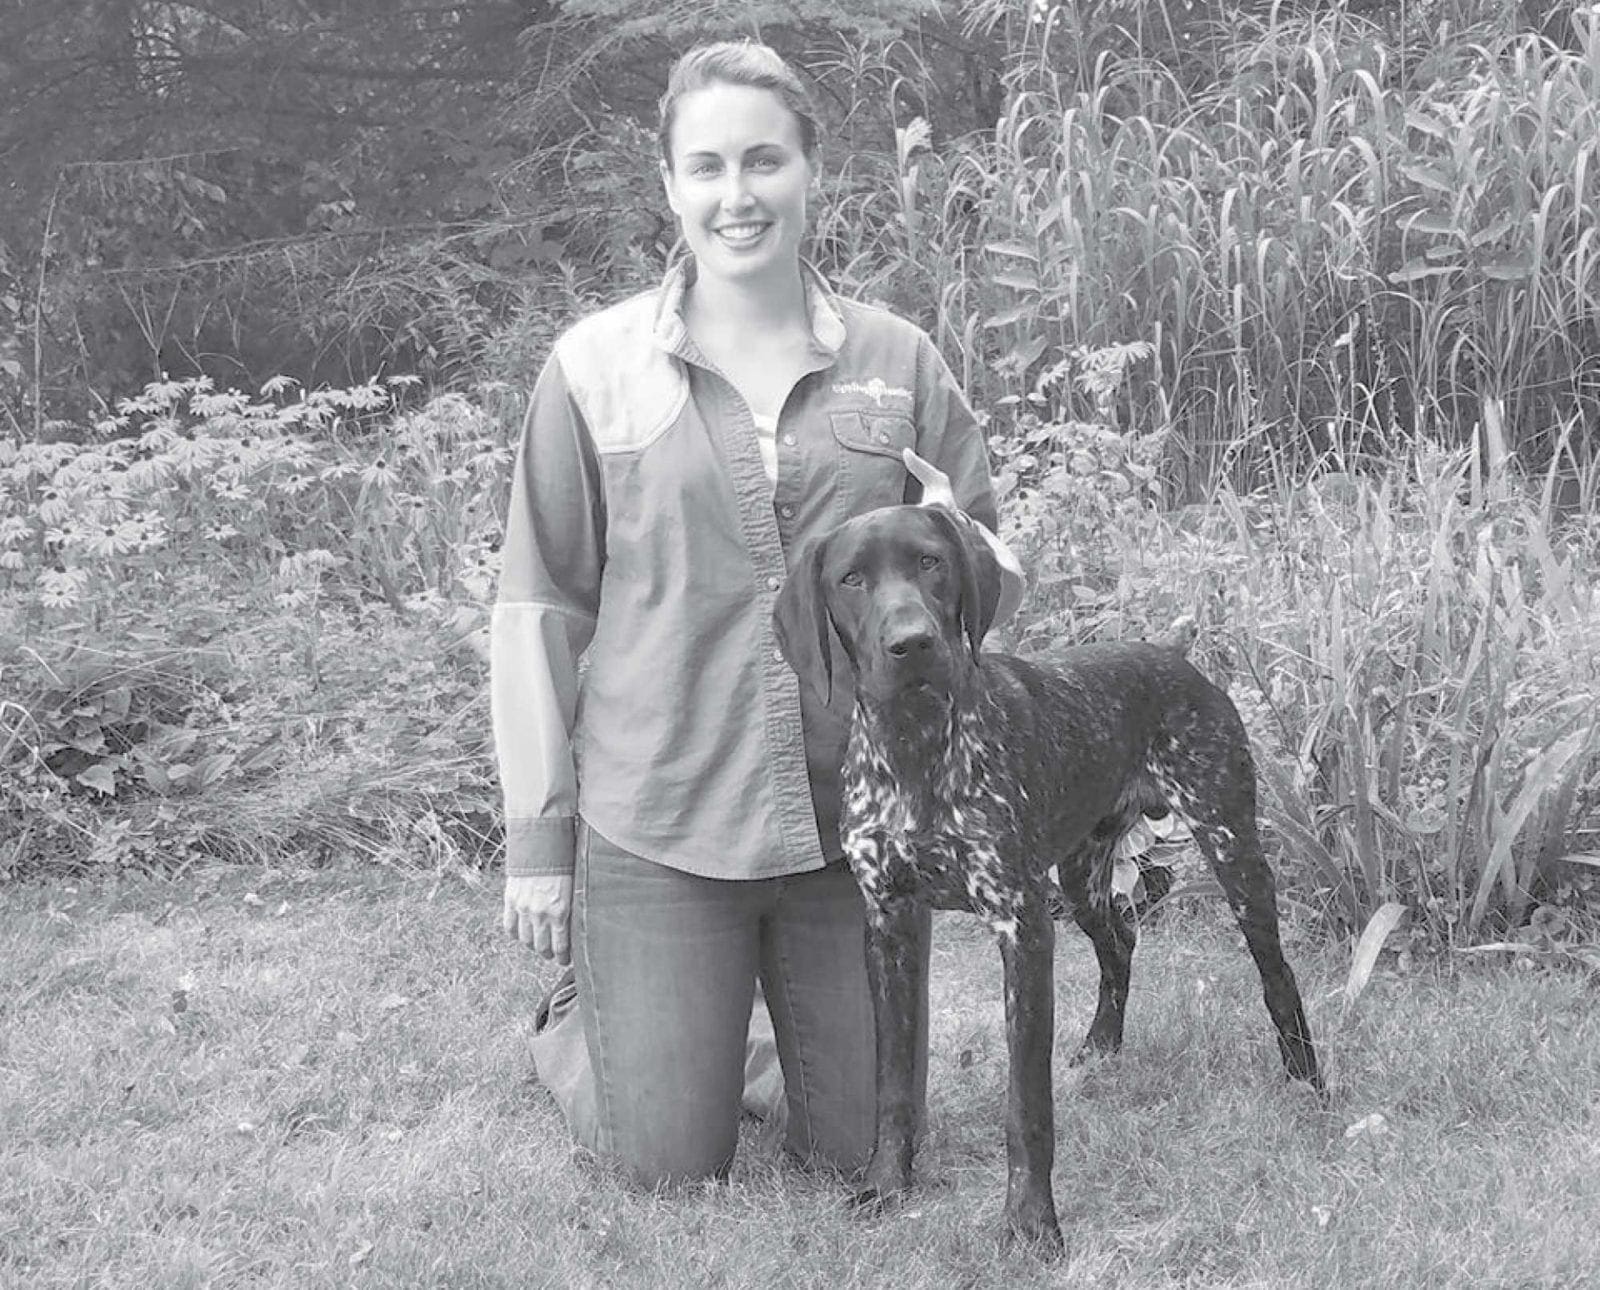 Upland hunter and veterinarian, Kristina Mott with her German shorthaired pointer